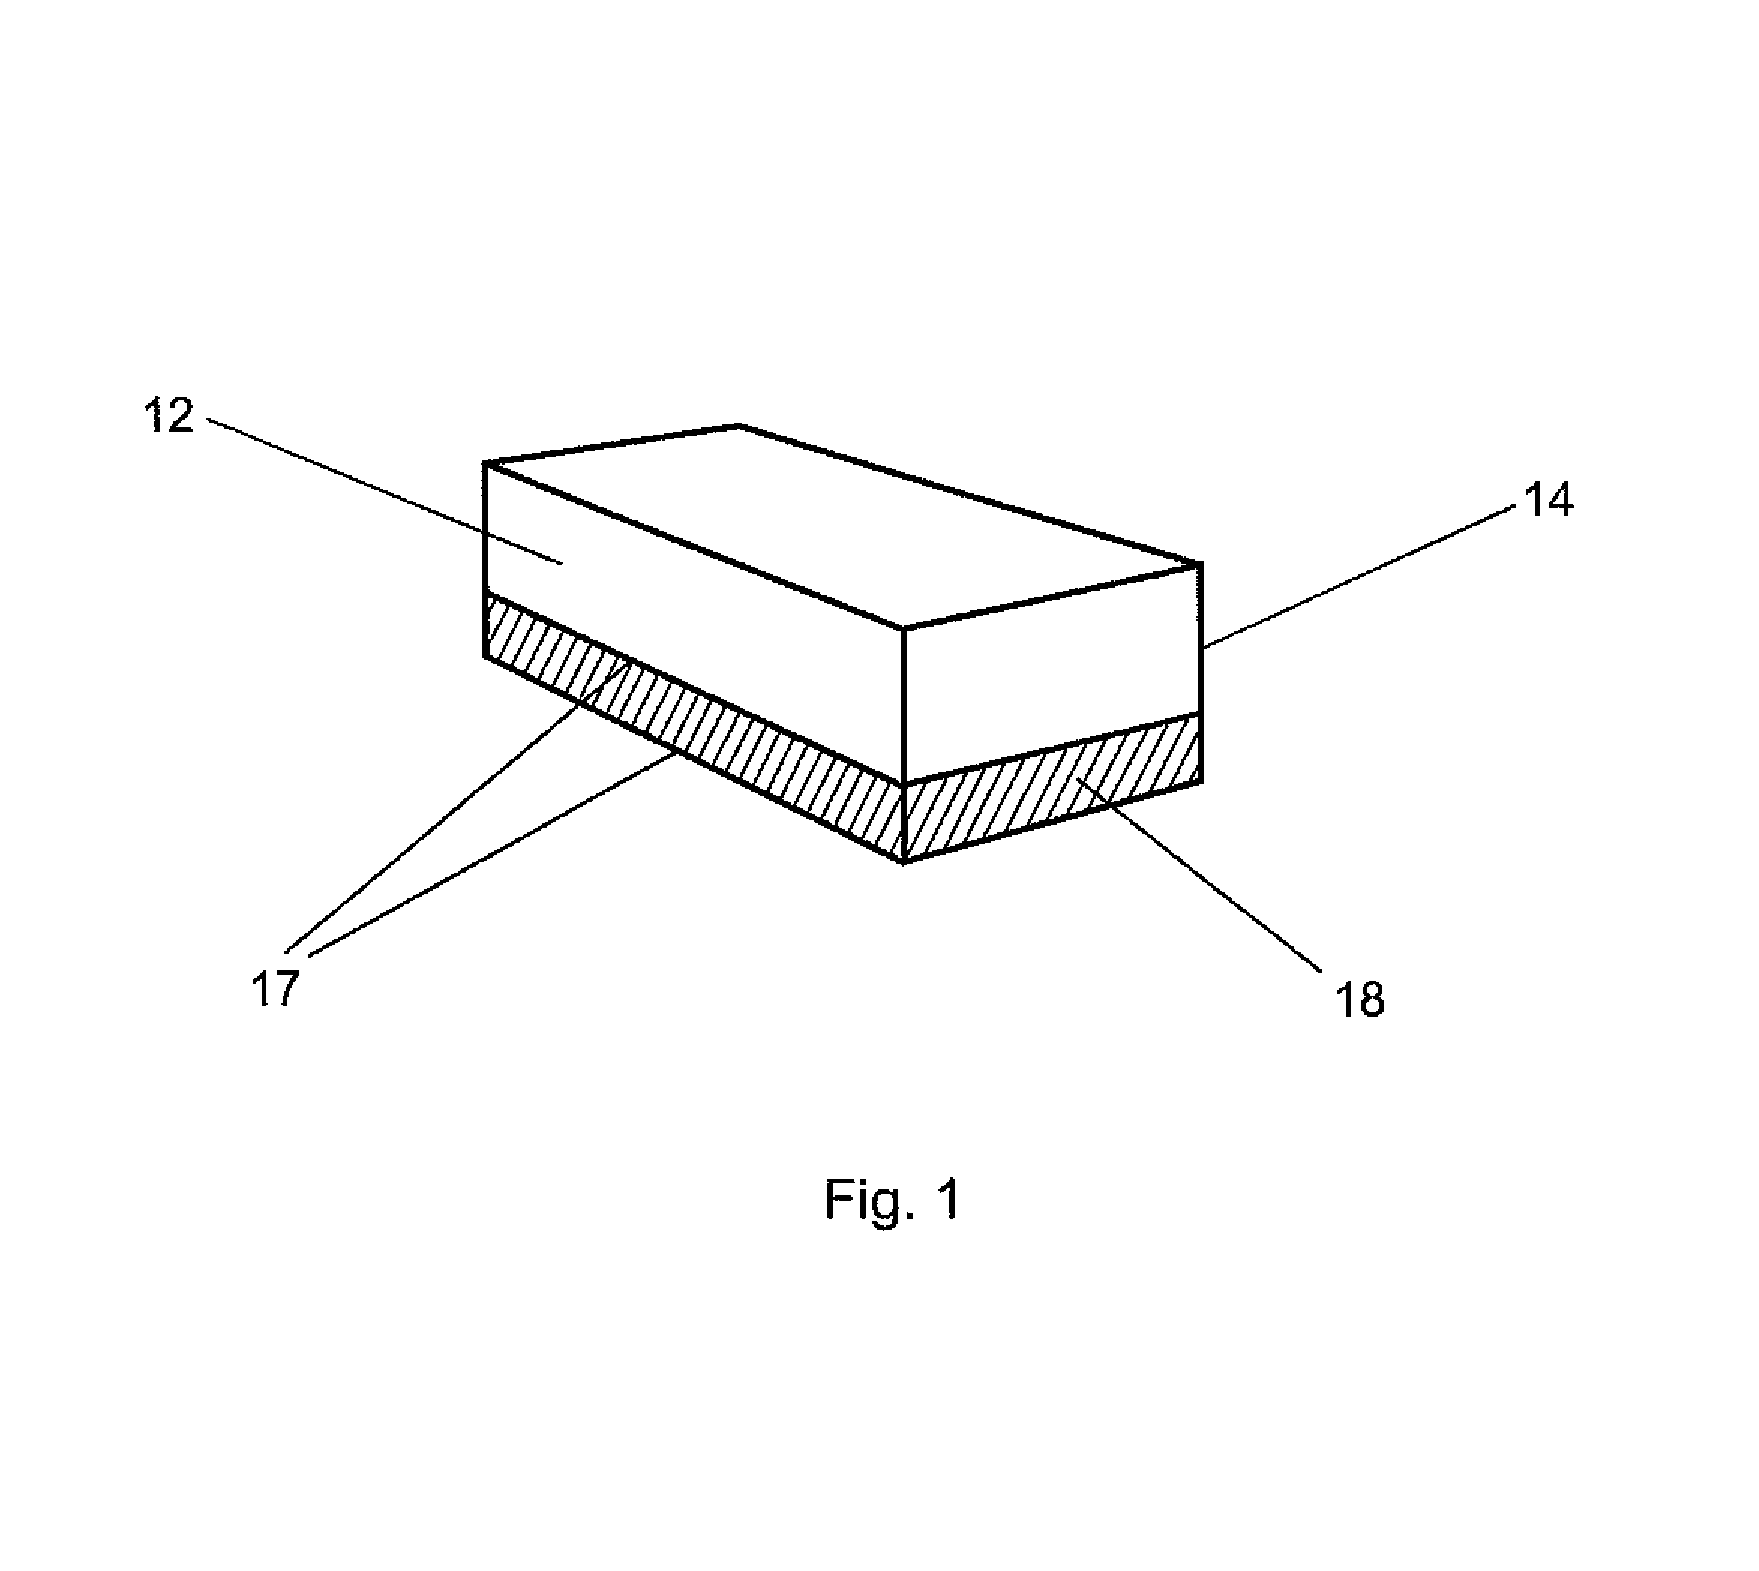 Linear explosive breaching apparatus and method